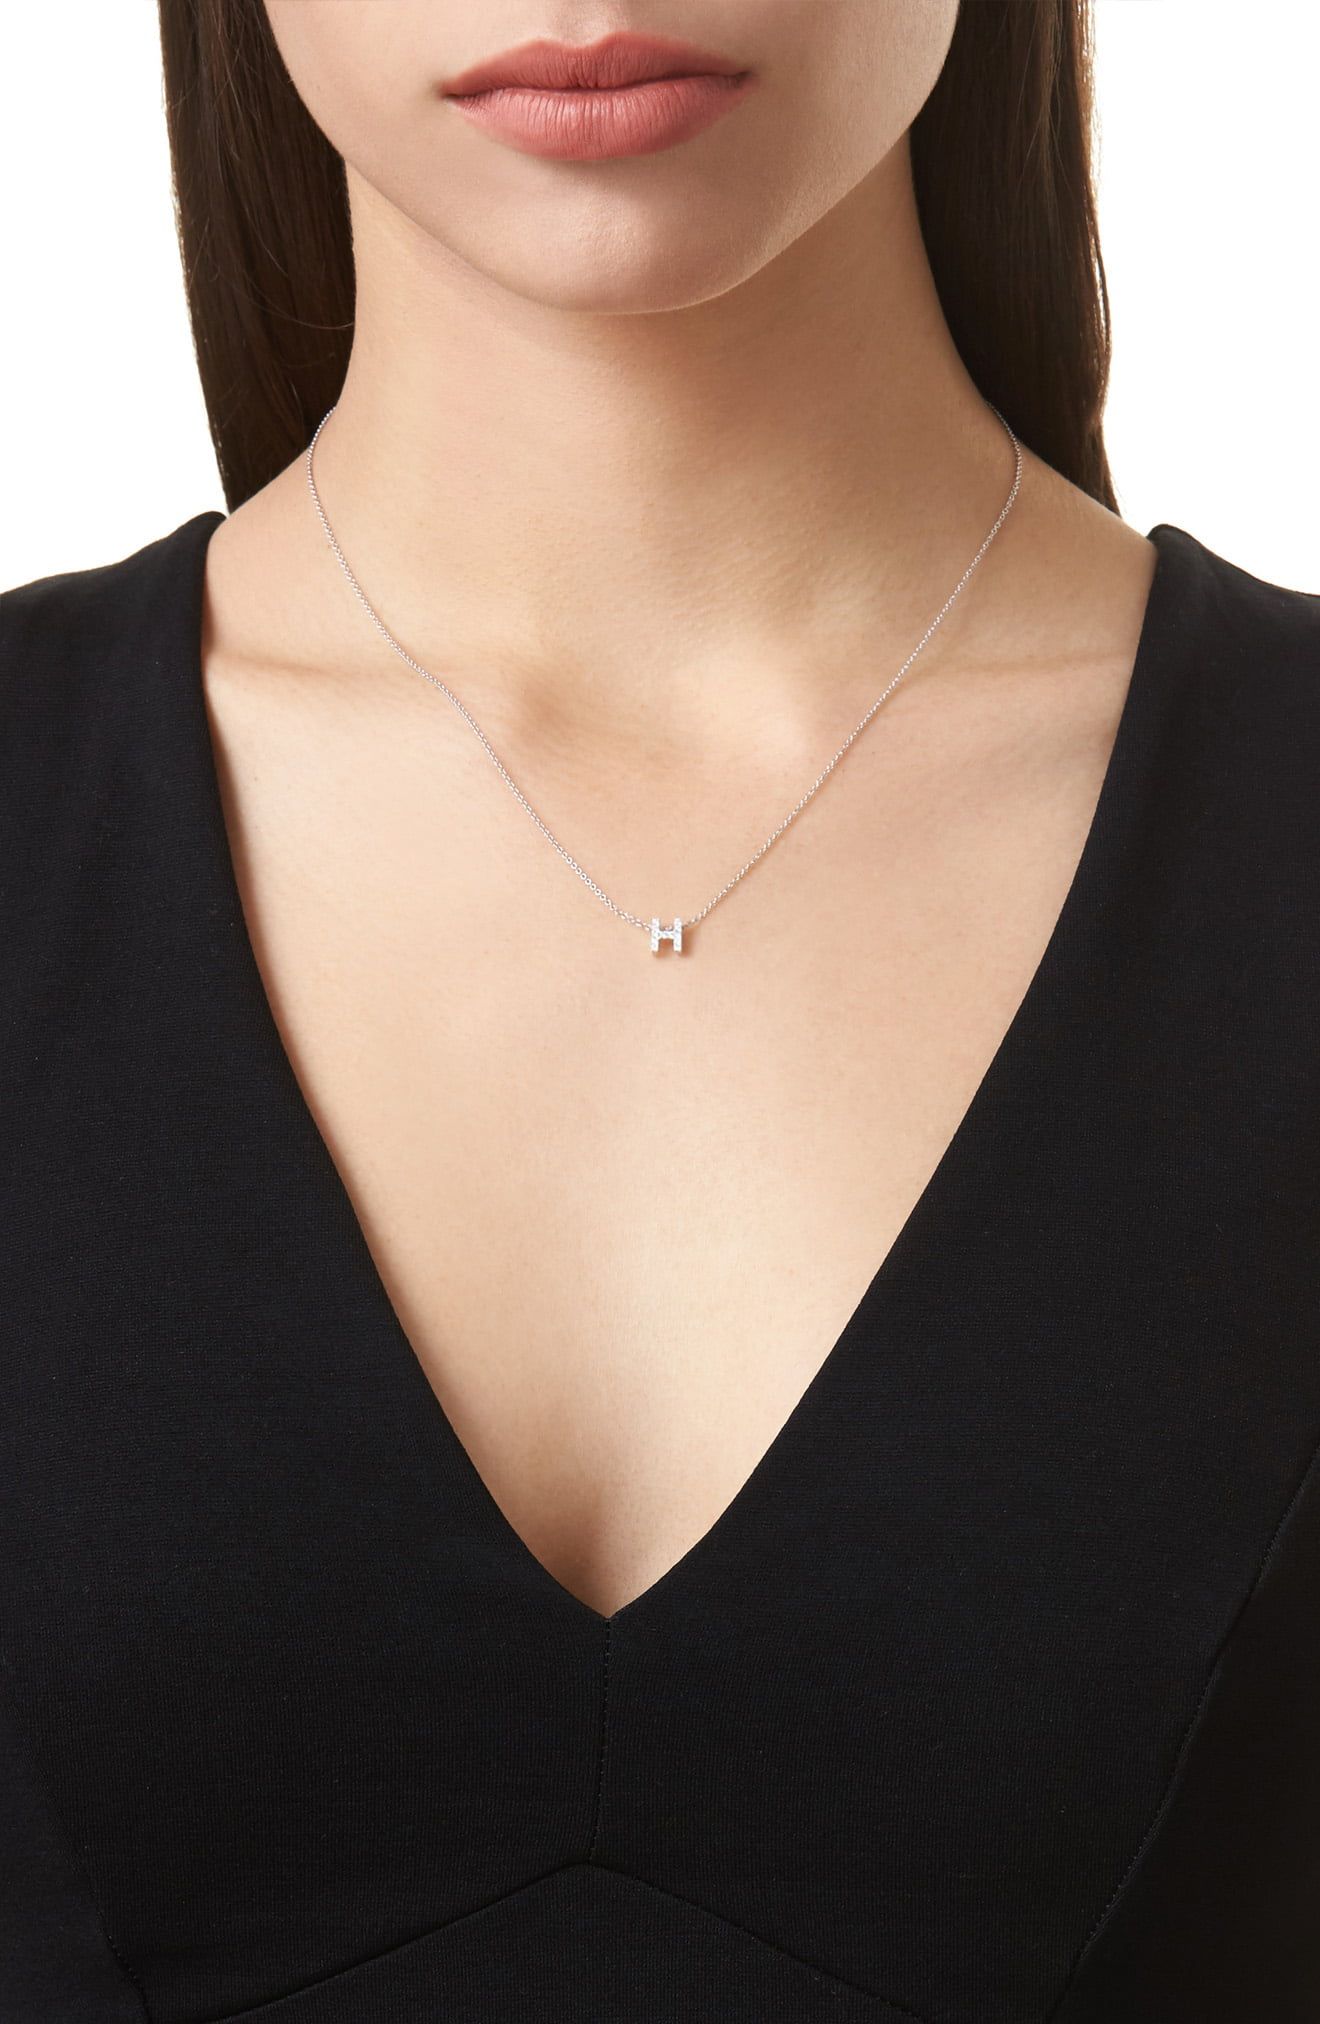 Women's Necklaces | Nordstrom Pertaining To Most Recently Released Sparkling Ice Cube Circle Pendant Necklaces (View 16 of 25)